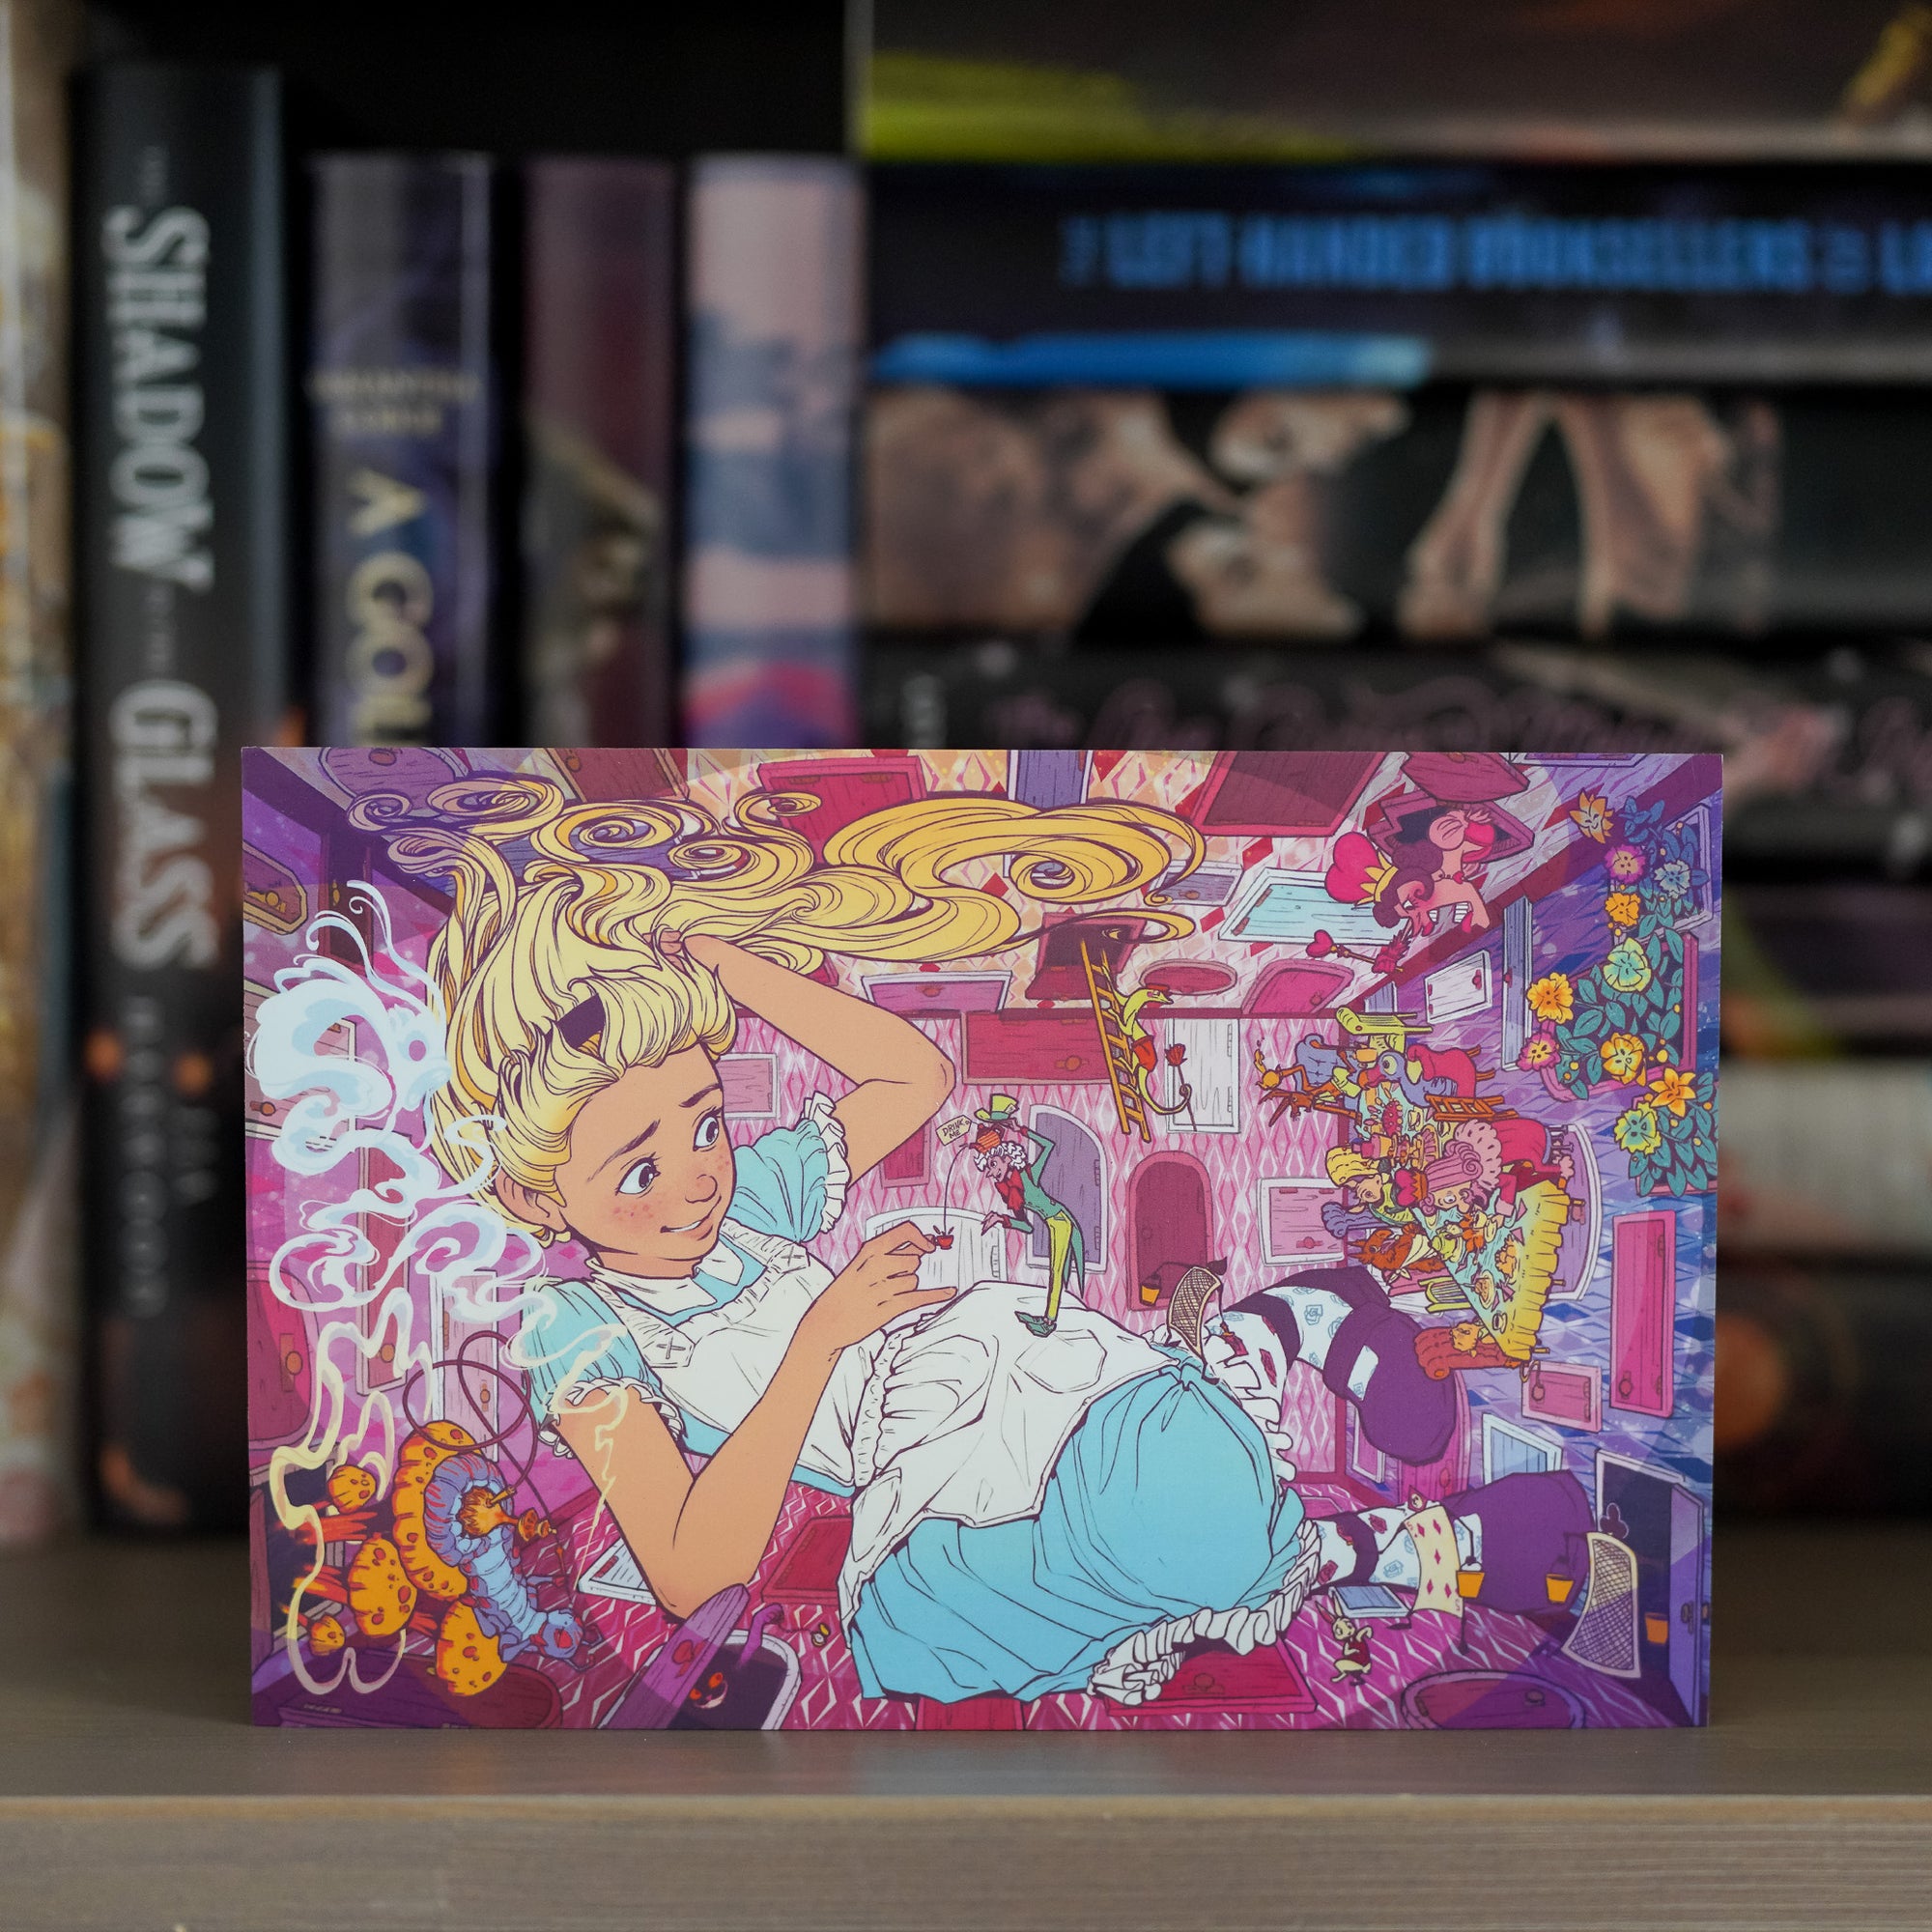 Alice in Wonderland Art Print designed with Alice surrounded by images of characters from the Alice in Wonderland story.